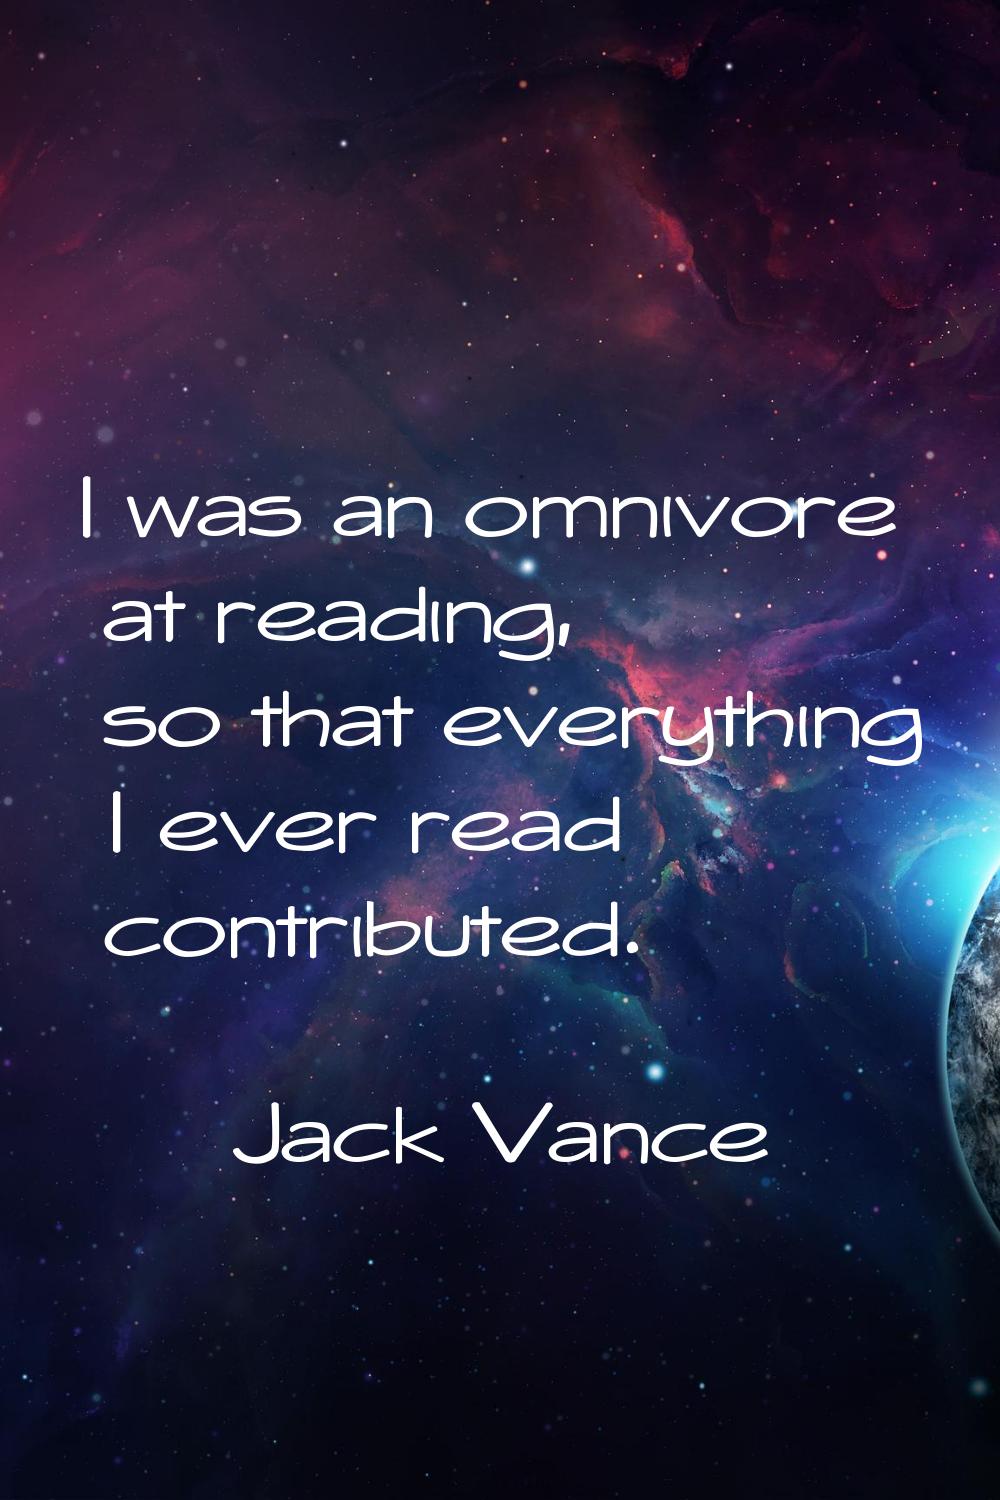 I was an omnivore at reading, so that everything I ever read contributed.